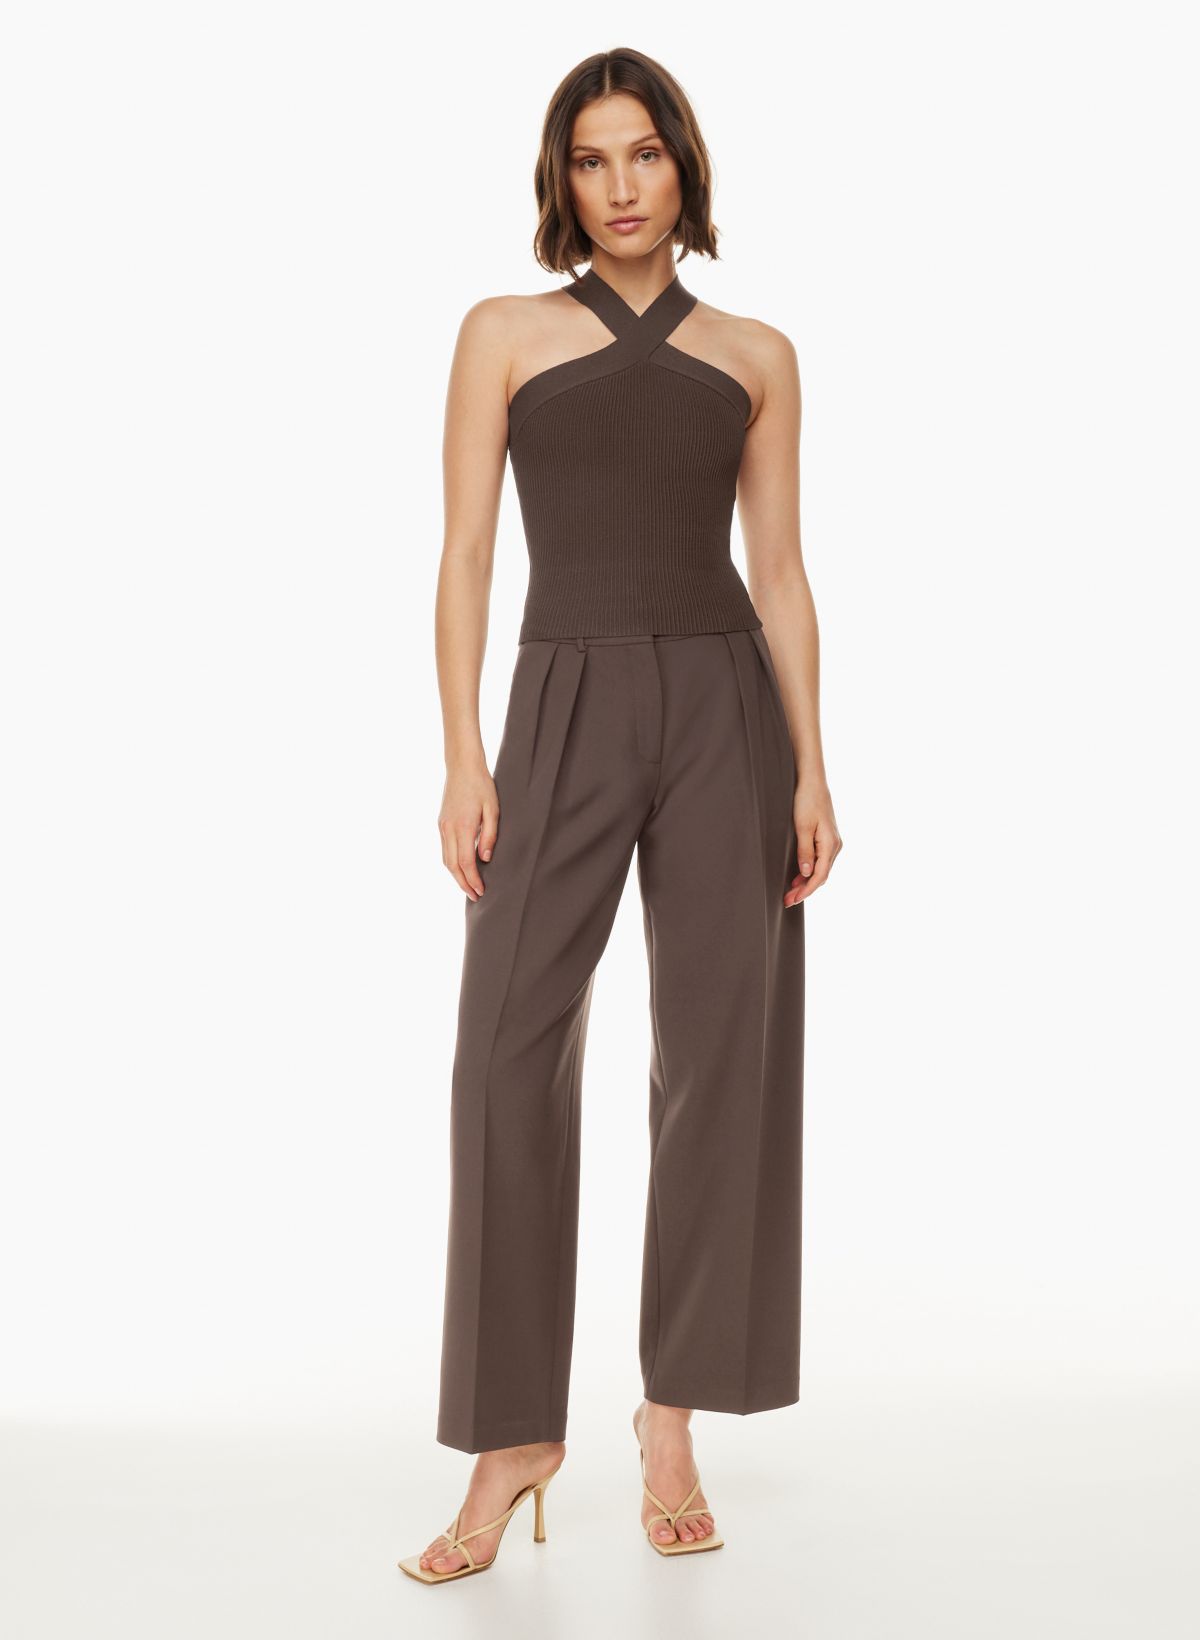 3 ways to style and wear a legging jumpsuit. This one is from @Aritzia